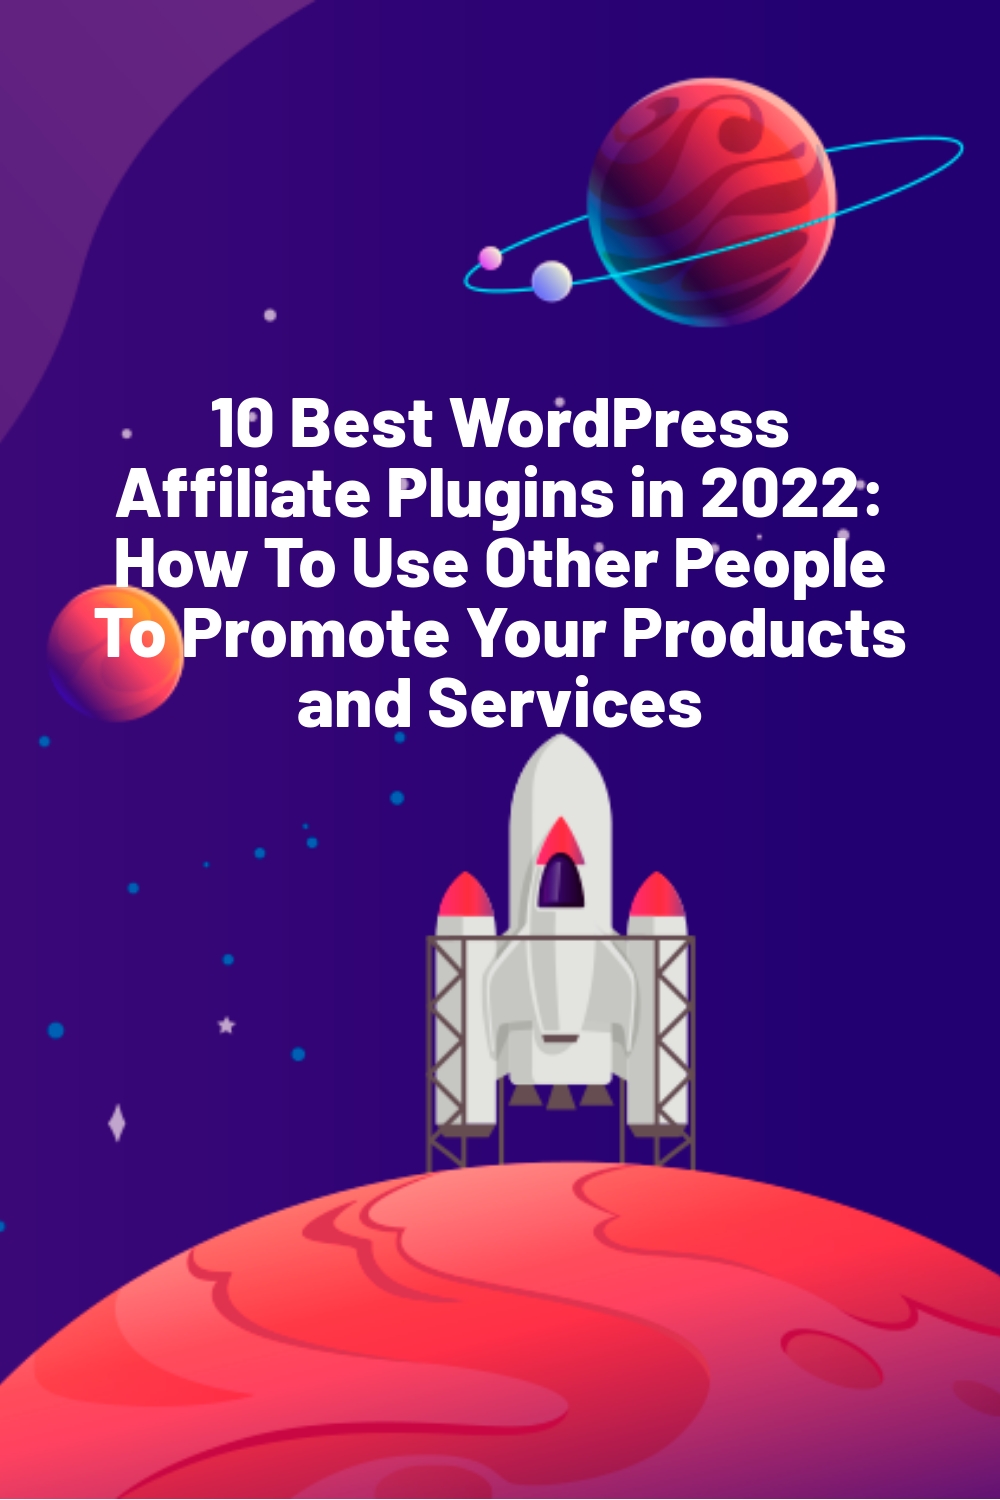 10 Best WordPress Affiliate Plugins in 2022: How To Use Other People To Promote Your Products and Services